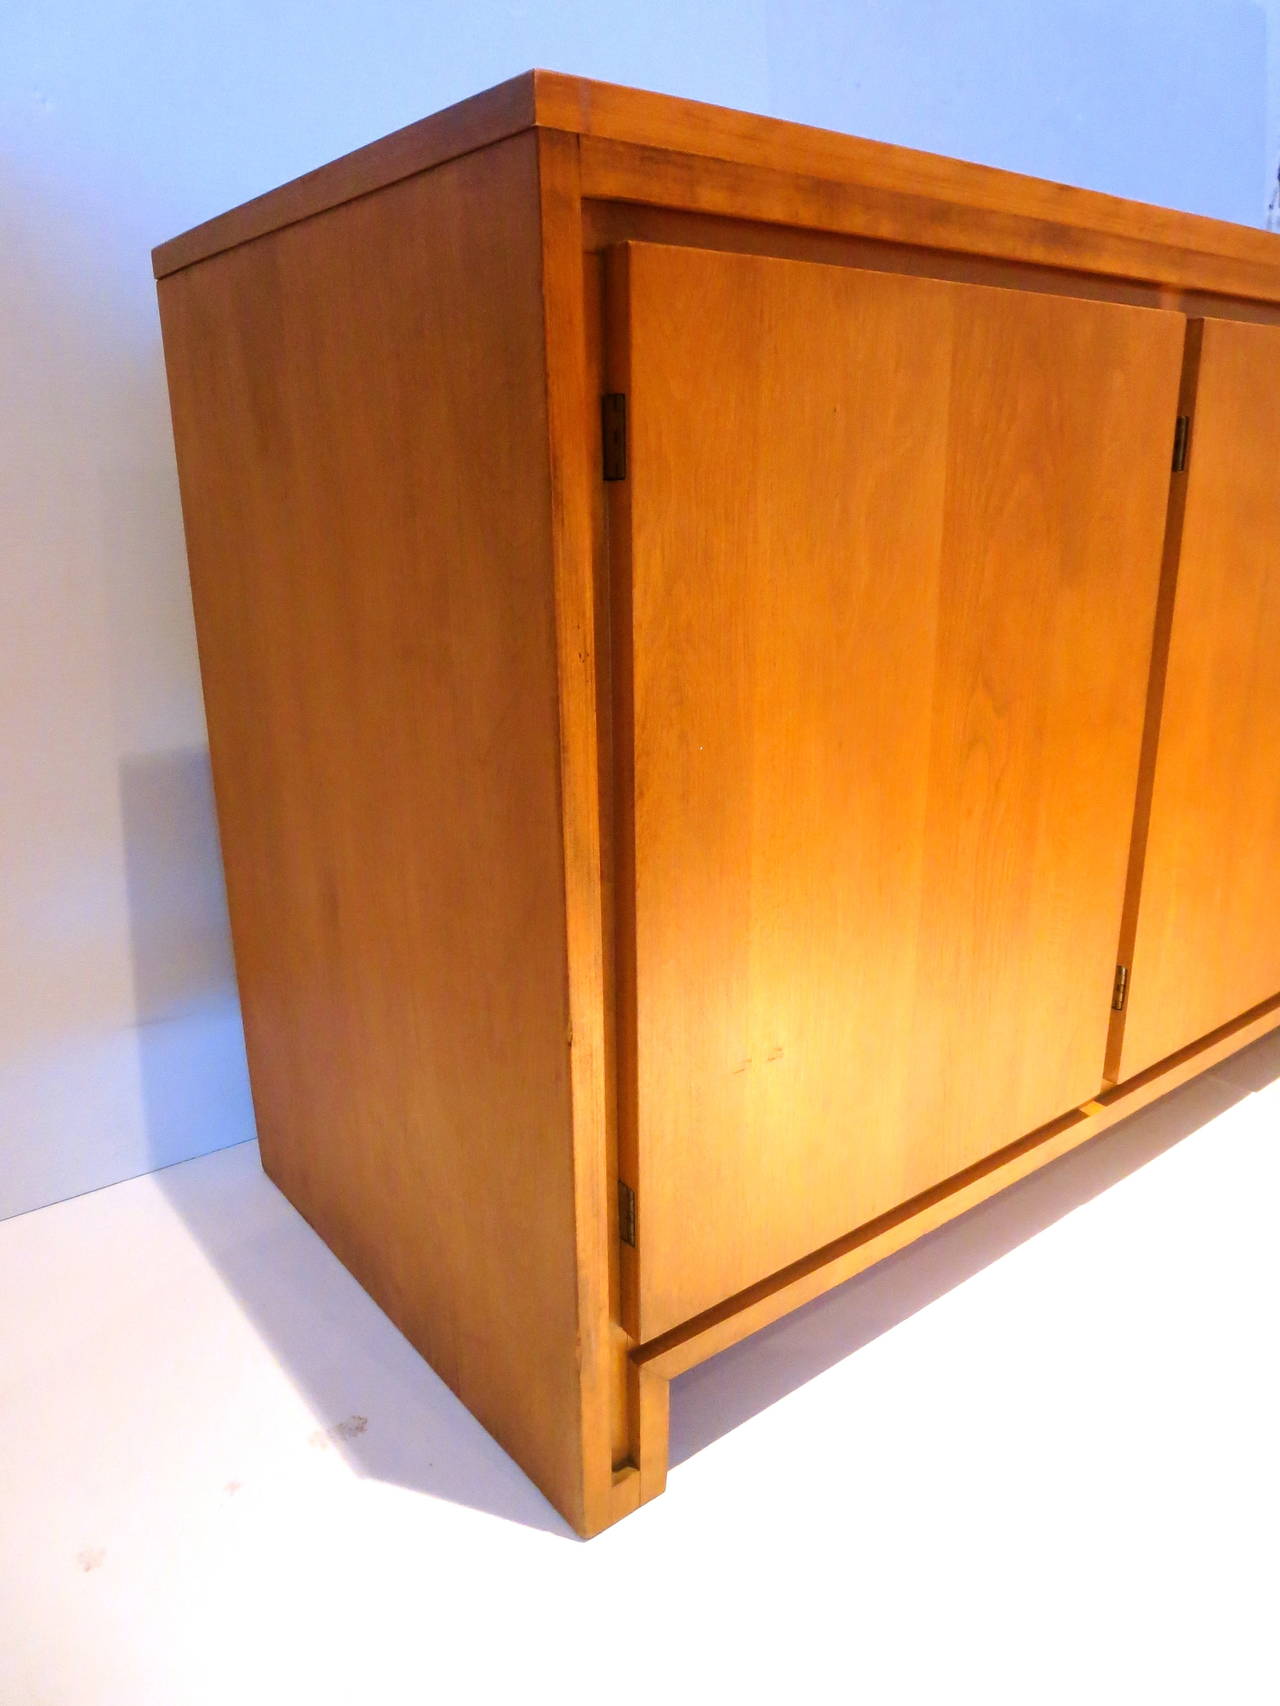 Art Deco 1950s Solid Maple Sideboard or Credenza Design by Russel Wright for Conant Ball